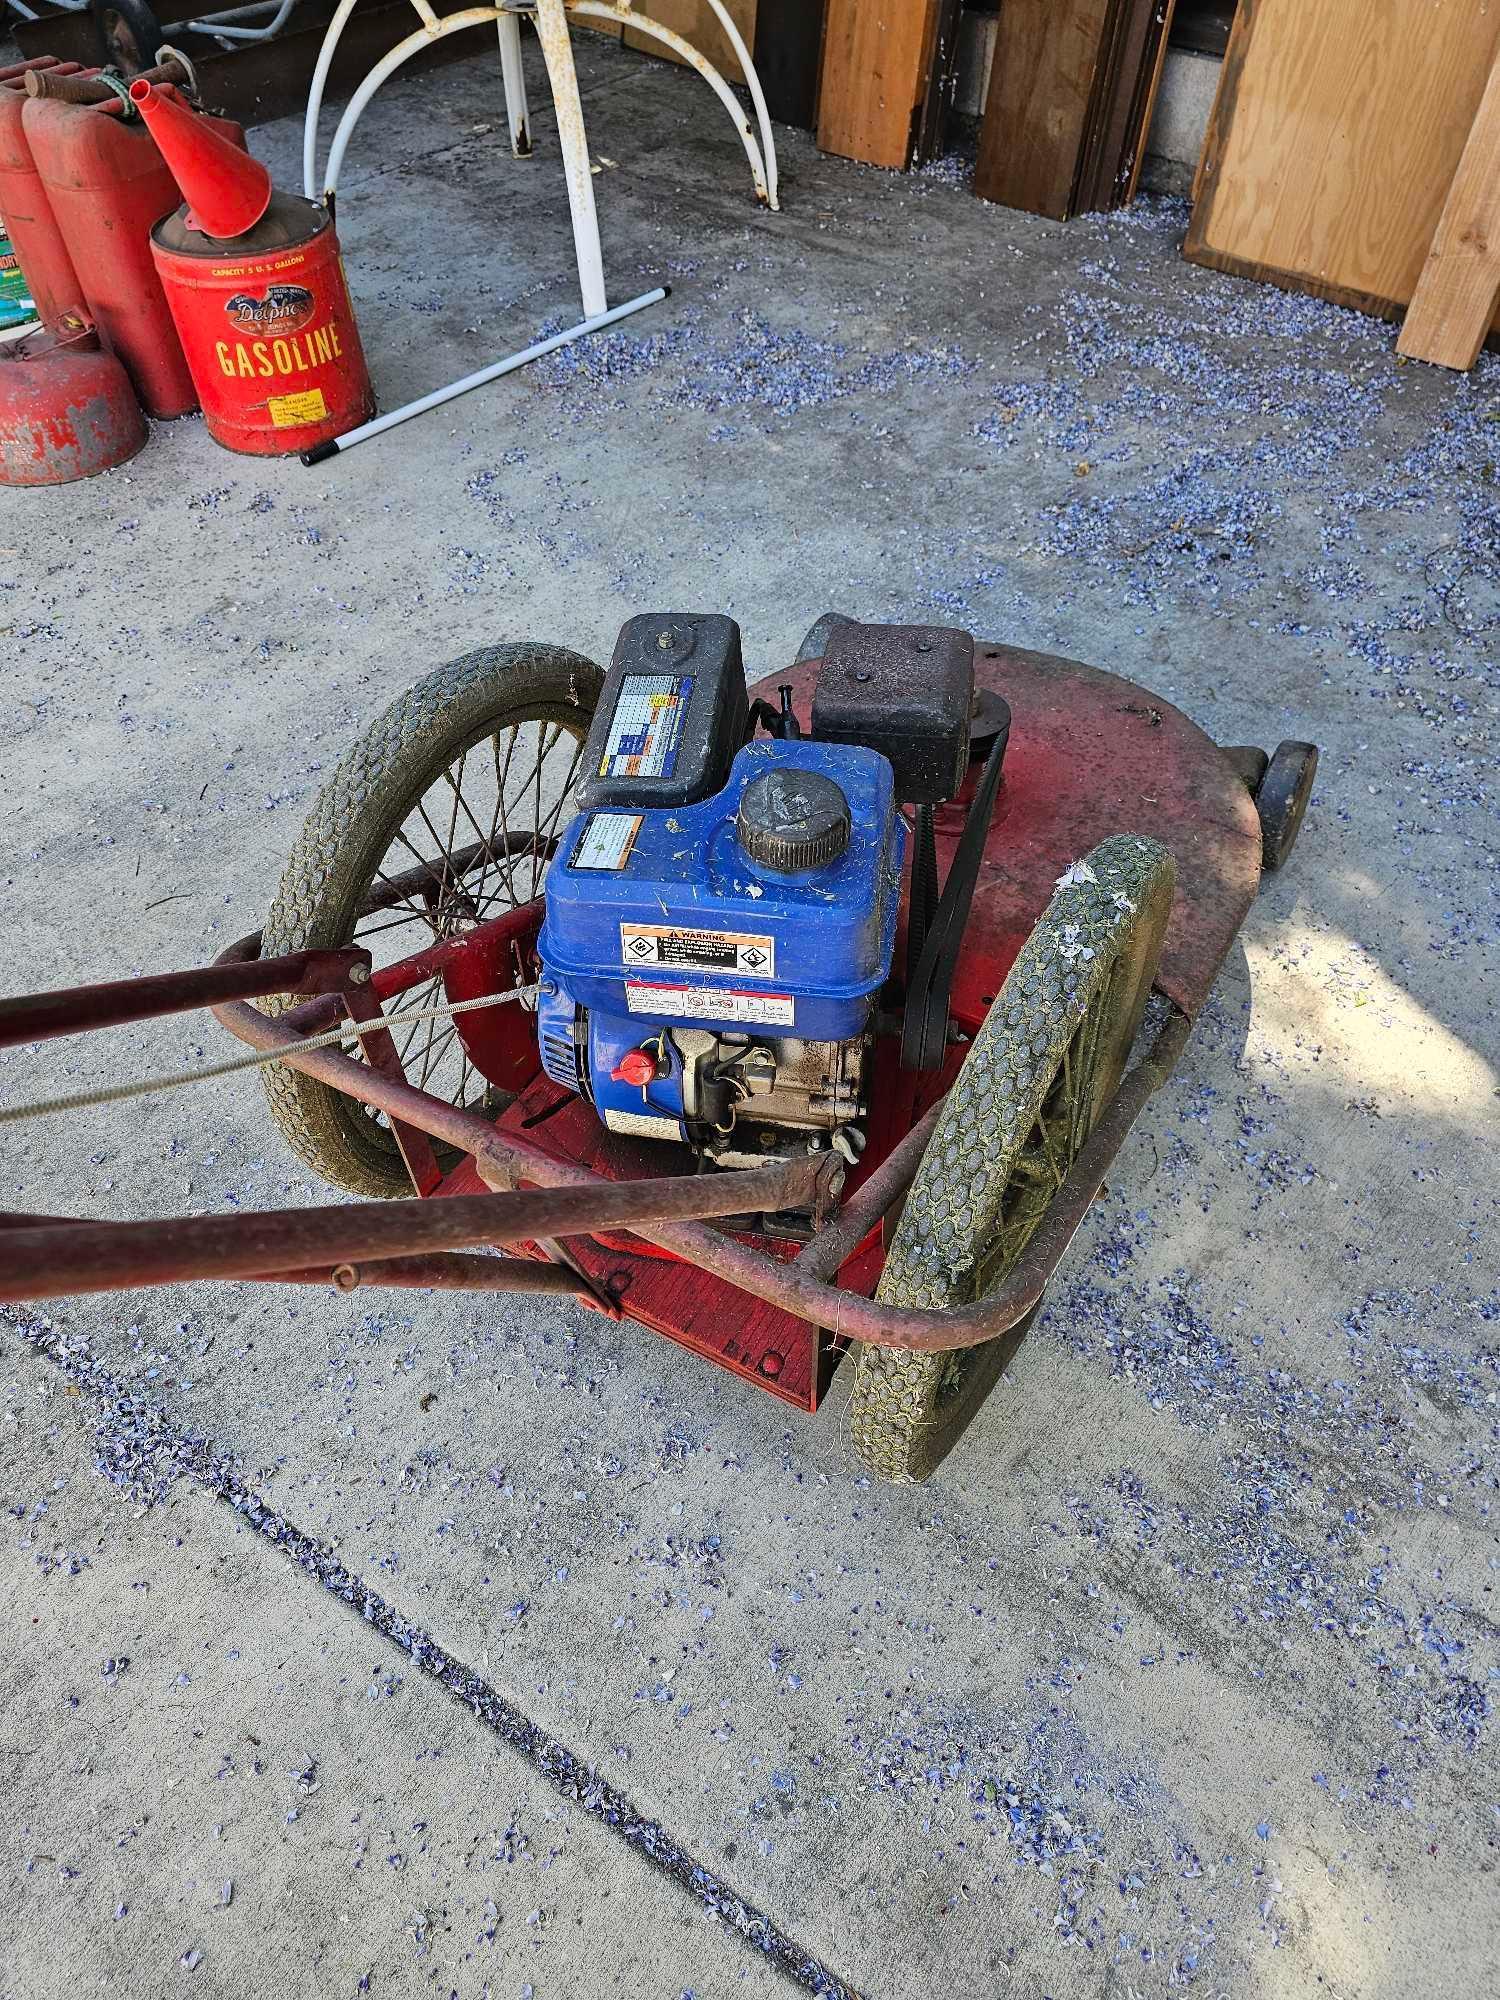 LARGE MOWER AND EDGER